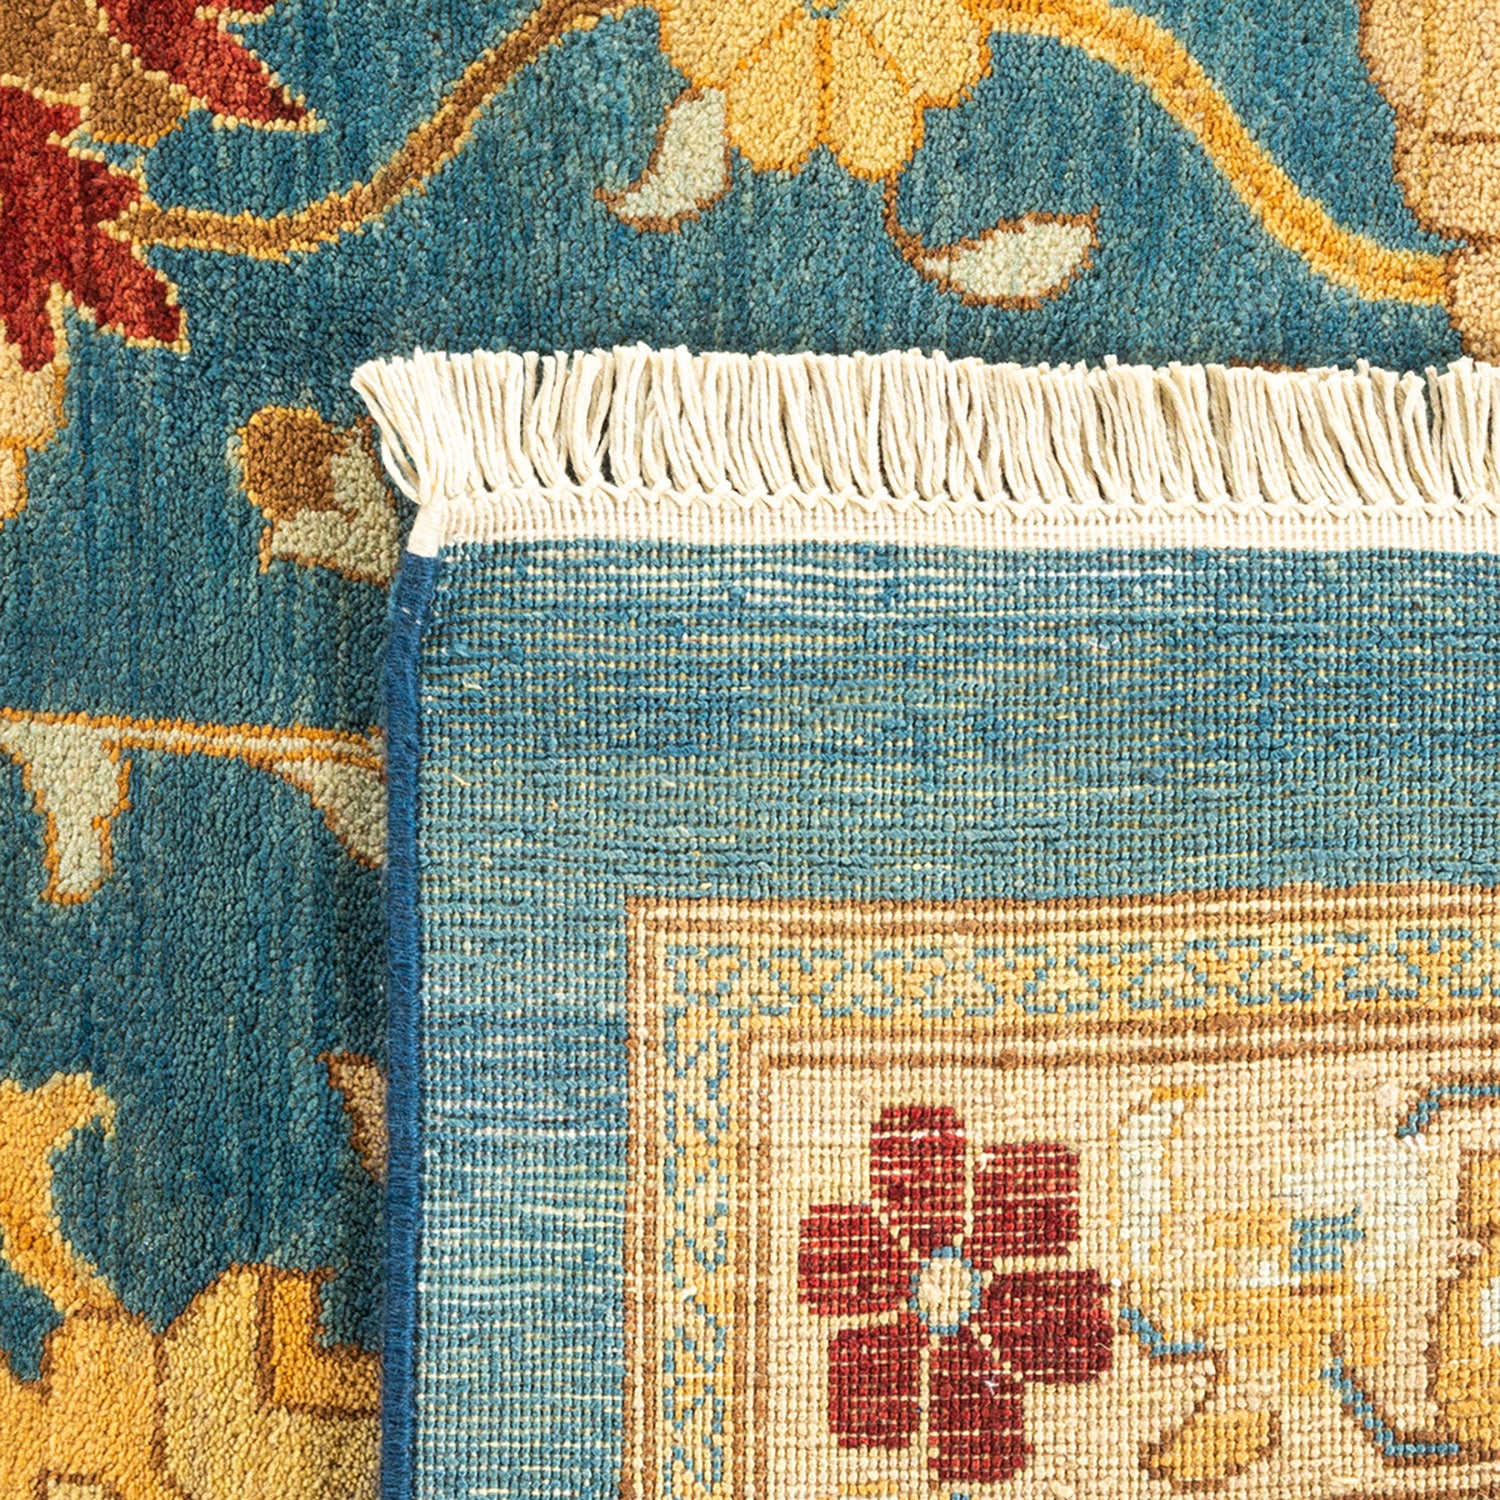 Close-up of a handcrafted woven rug with intricate floral design